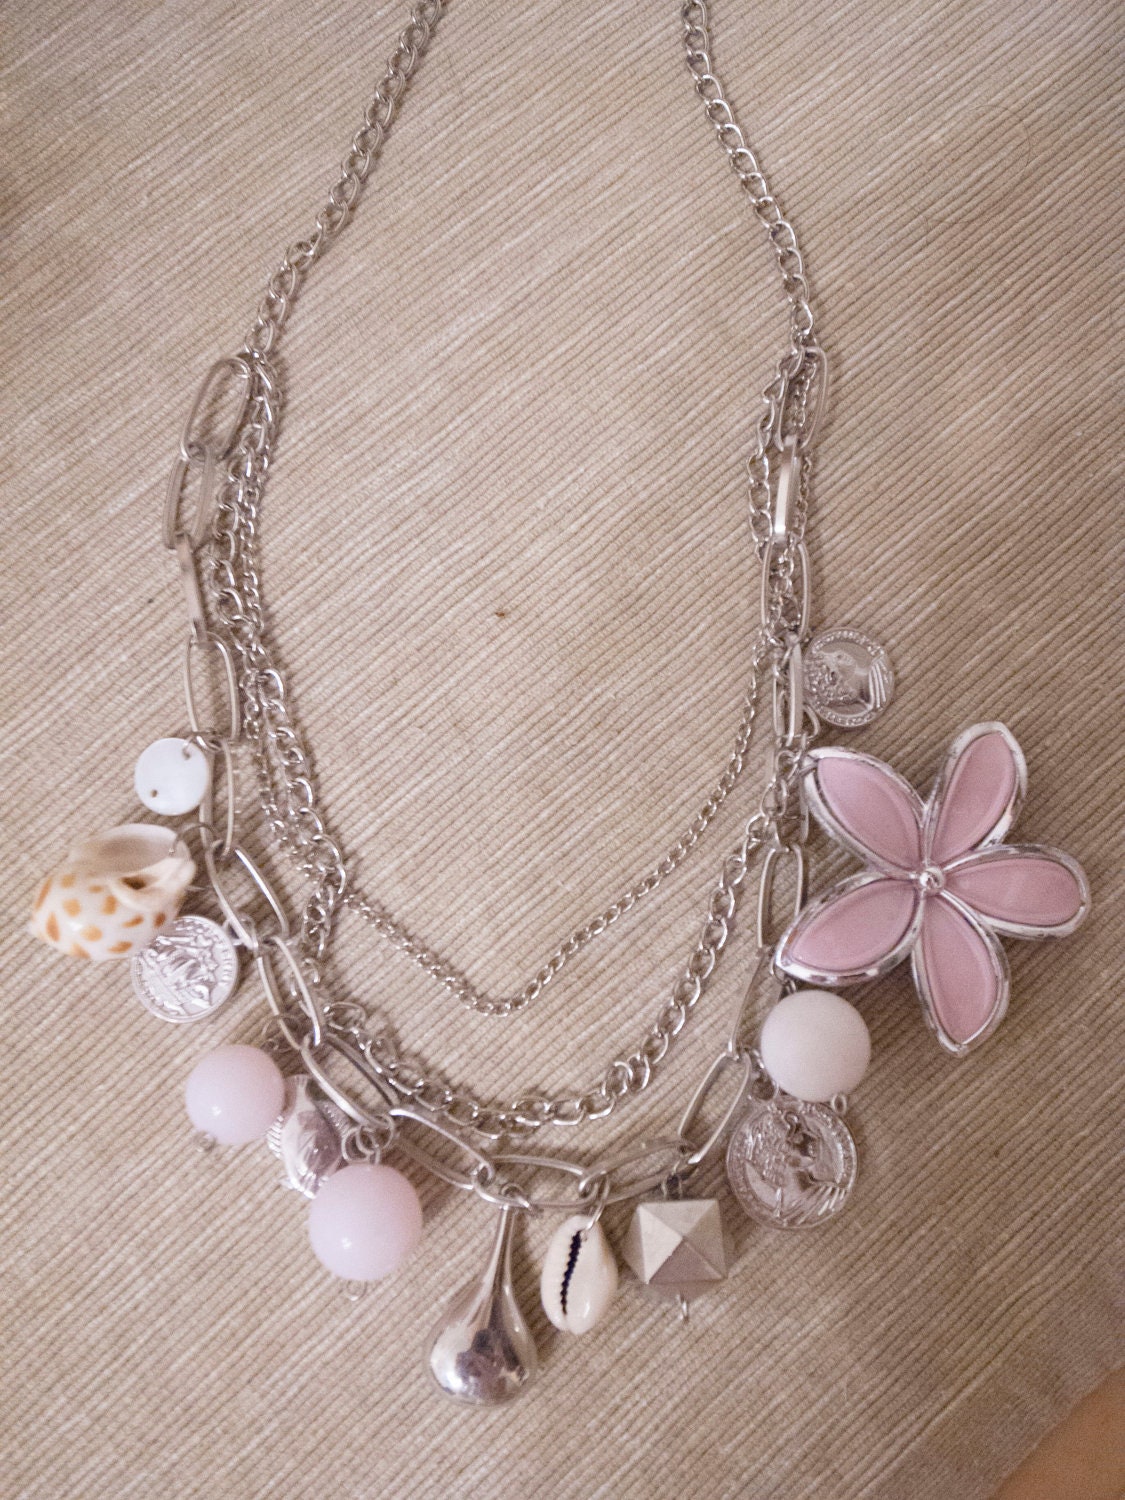 SALE-Chunky Charm Silver Plated and Pink Necklace for Summer